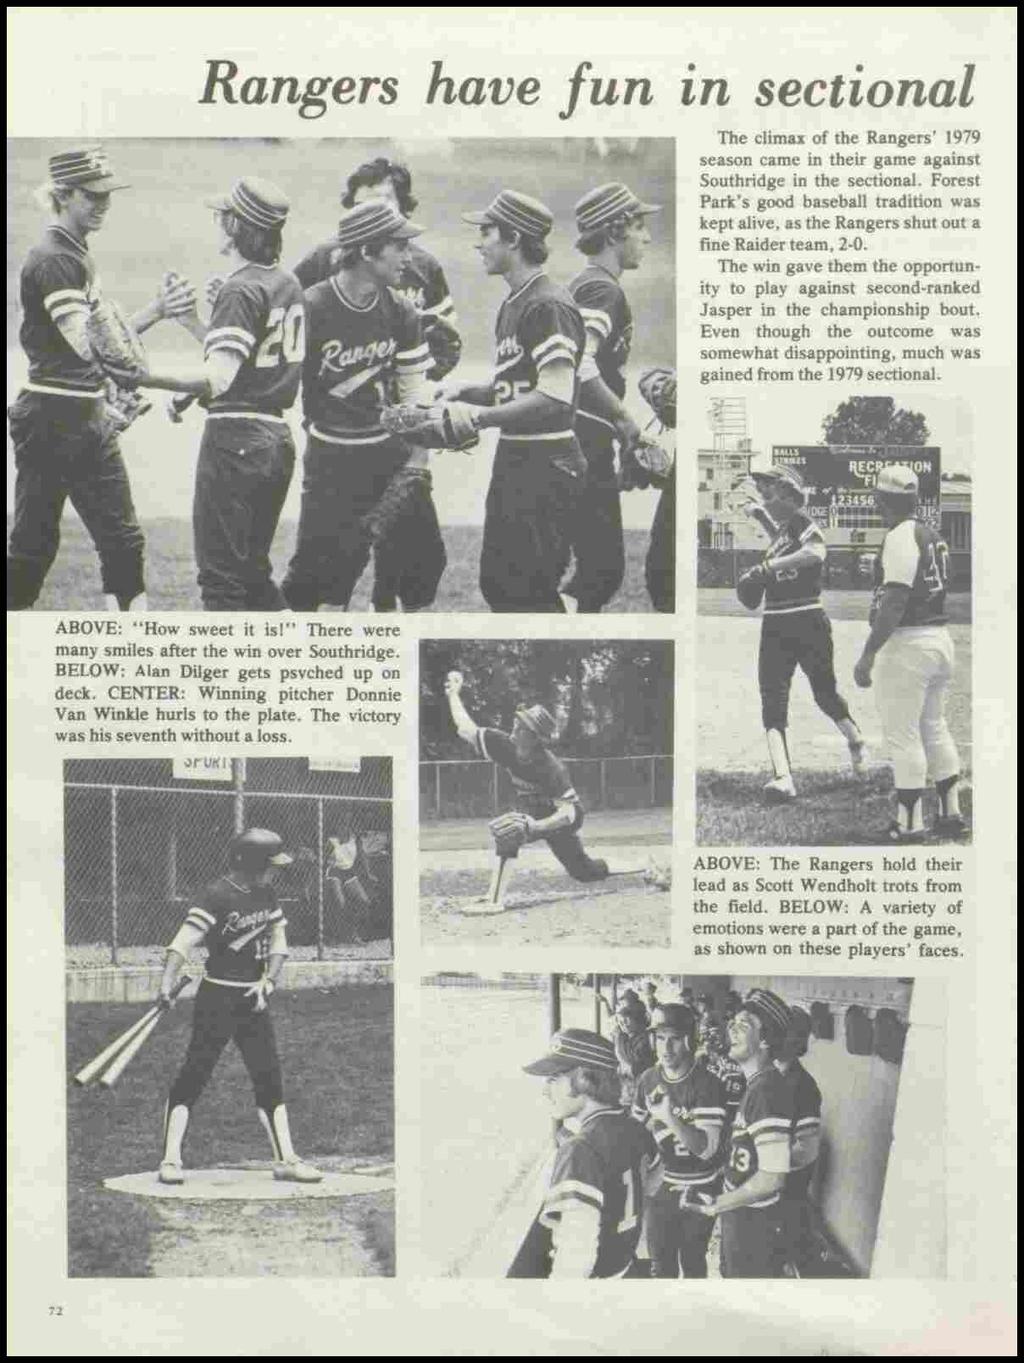 Rangers have fun zn sectional The climax of the Rangers' 1979 season came in their game against Southridge in the sectional.